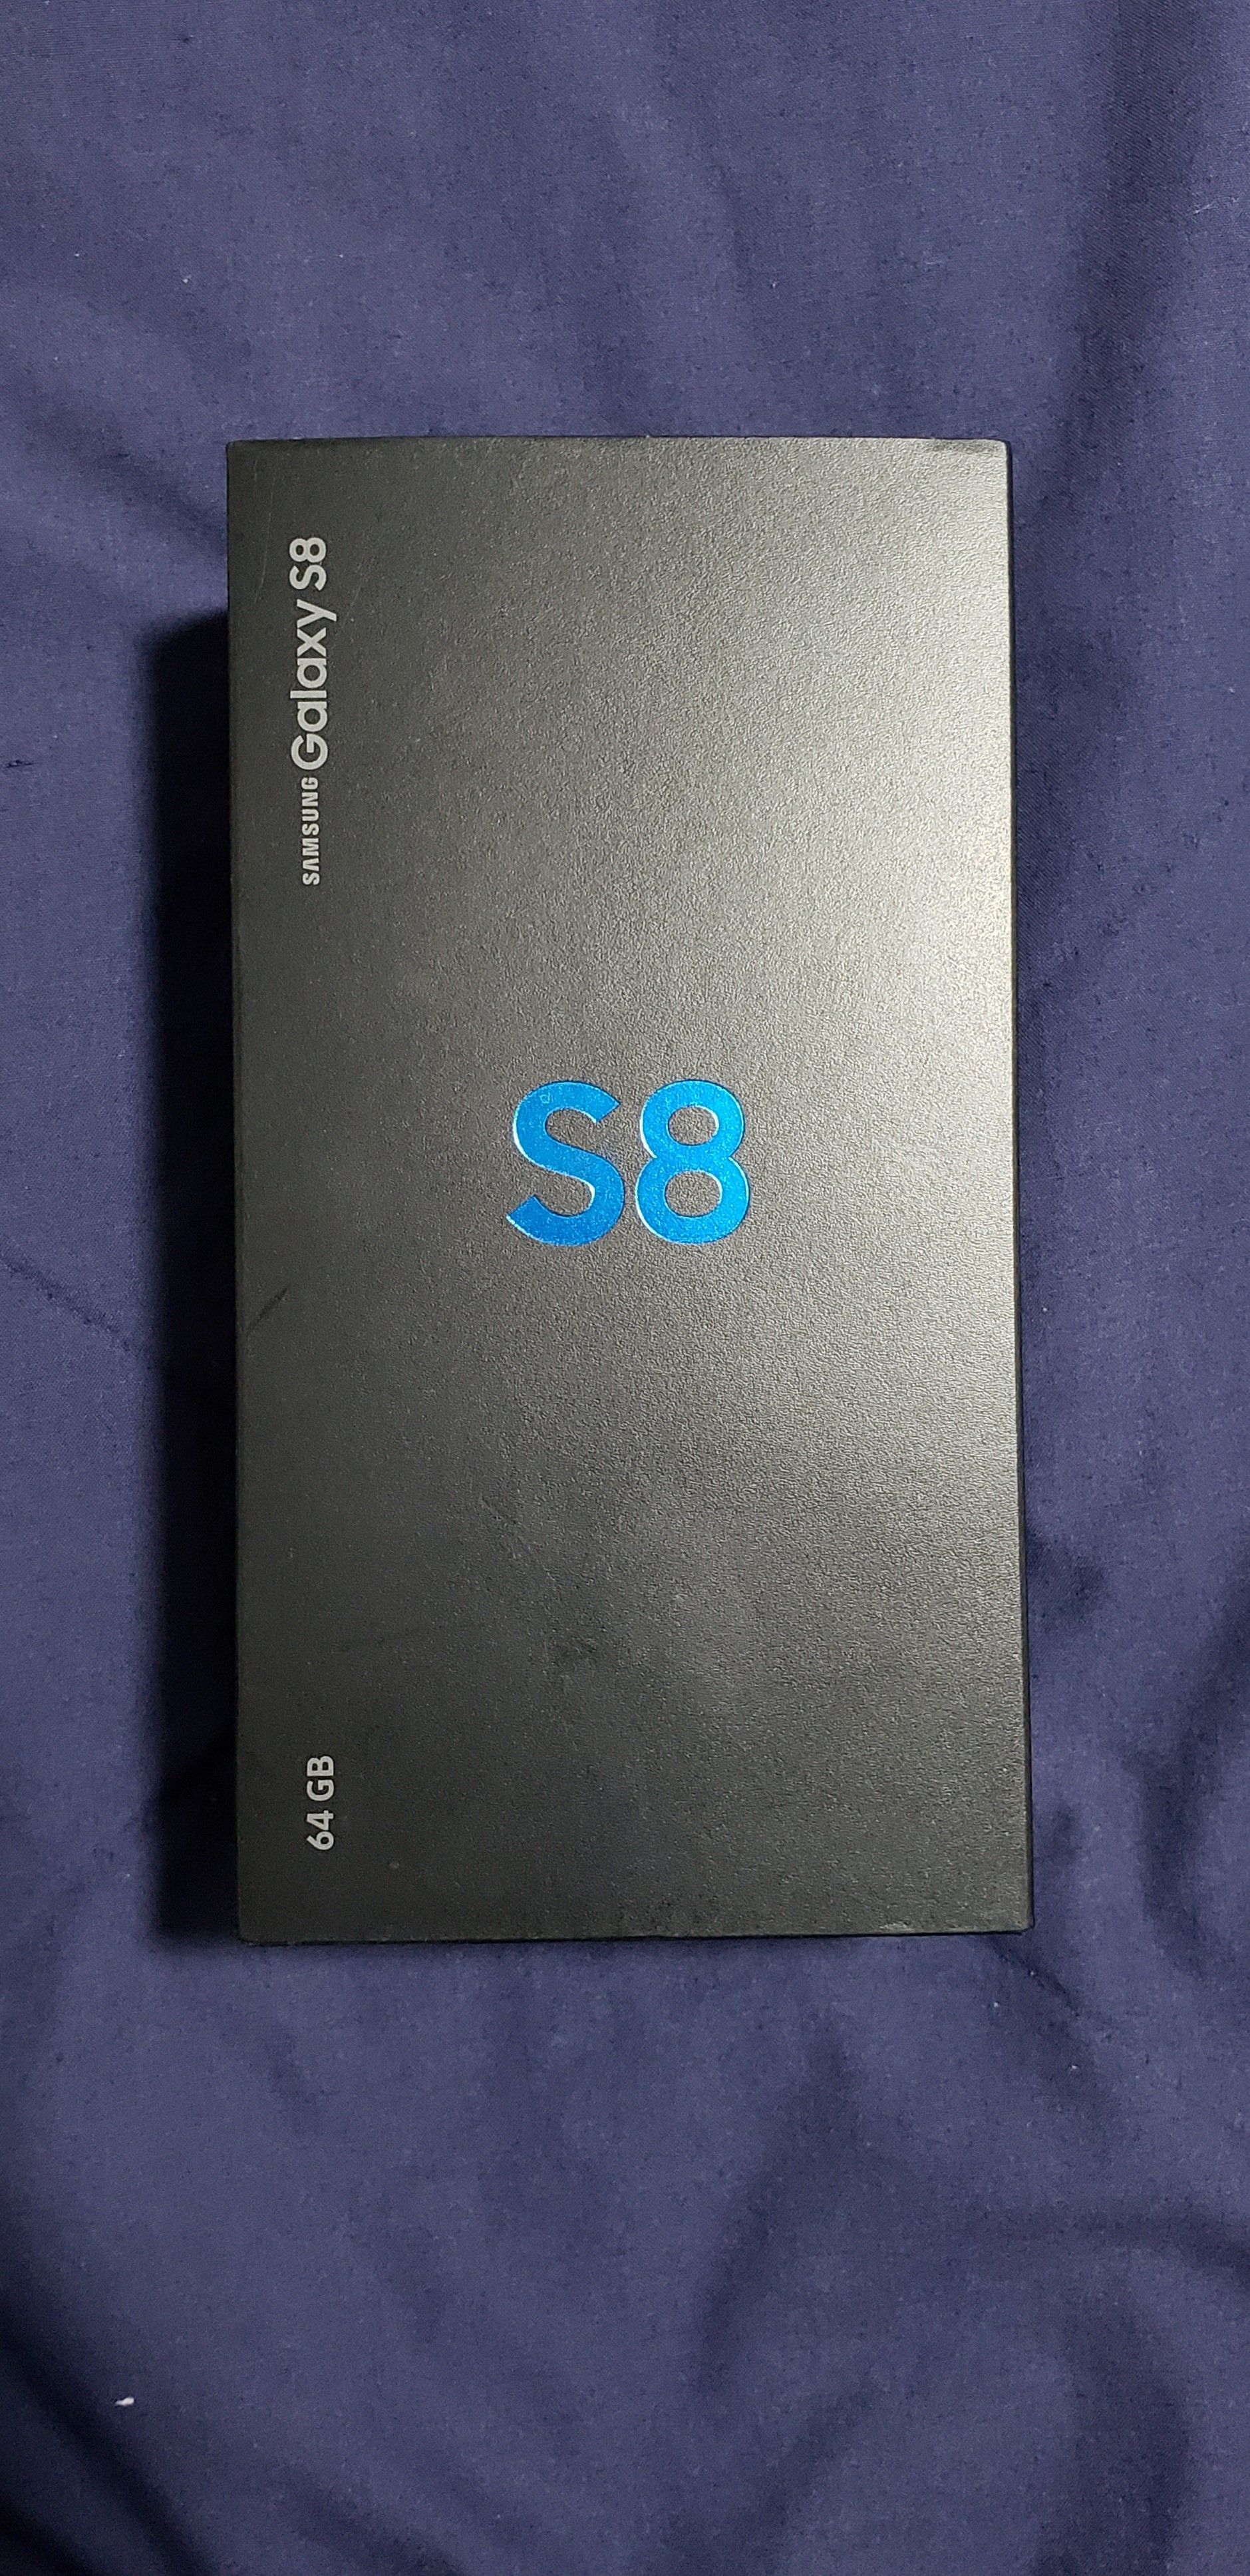 SAMSUNG GALAXY S8 64GB BLACK - UNLOCKED FOR ANY CARRIER - LIKE NEW IN PERFECT CONDITION